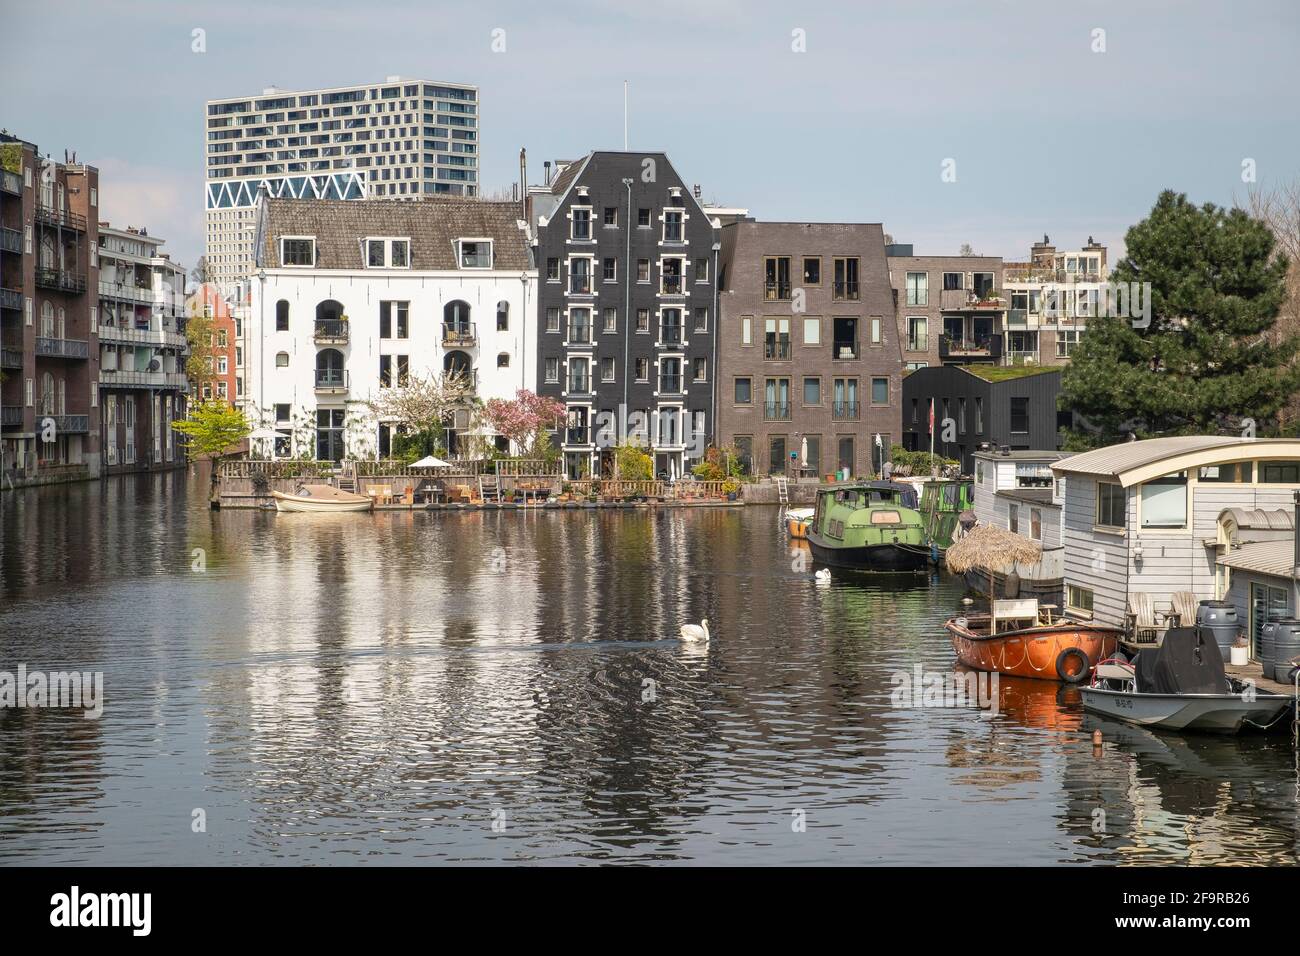 Houseboats, old and new apartments on a canal in Amsterdam. Stock Photo